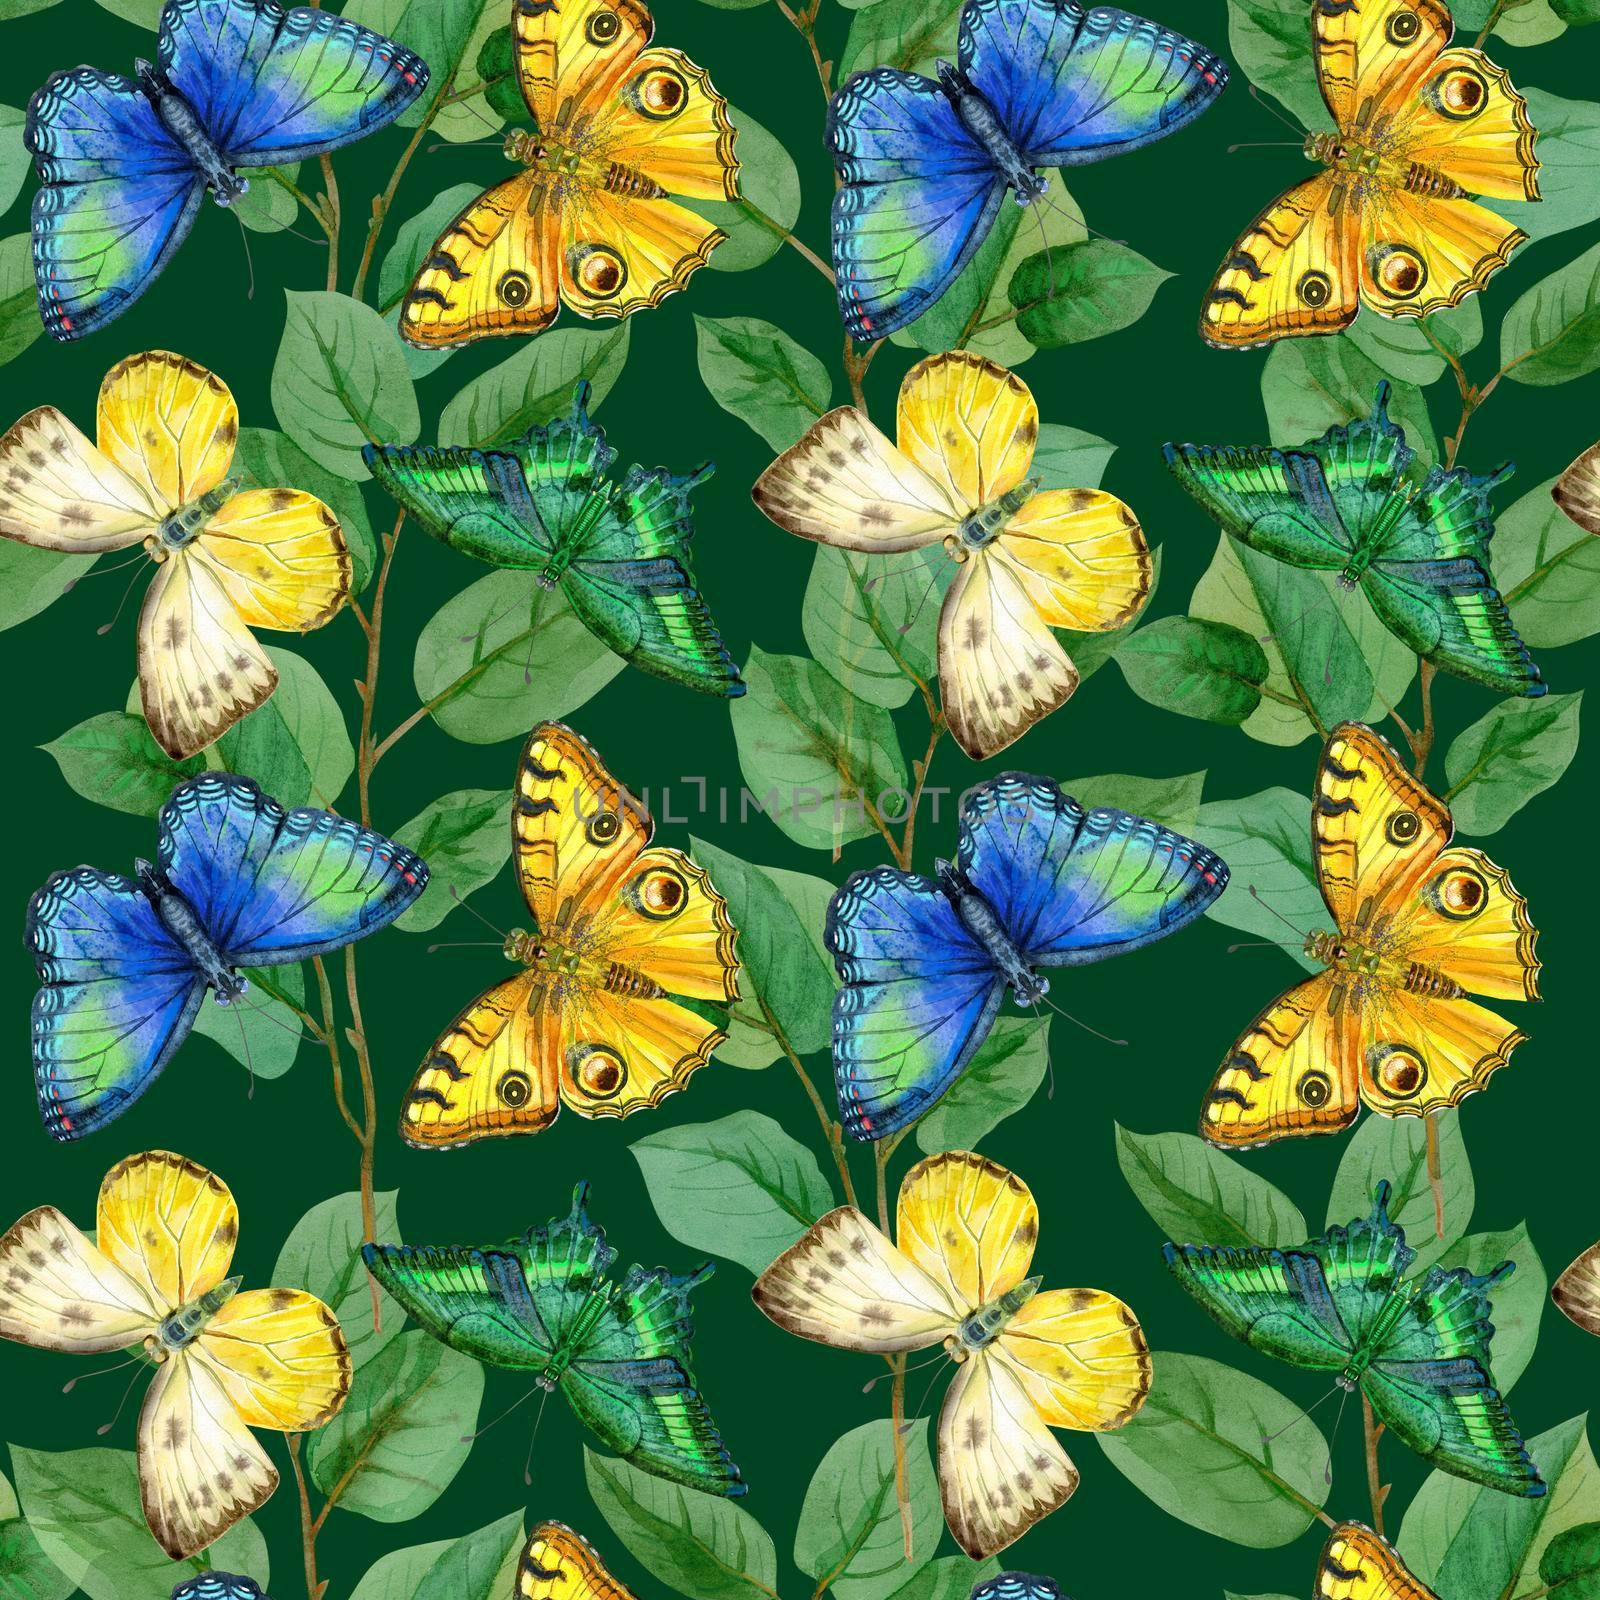 Floral leaves seamless pattern with colorful butterflies on dark green background by NataOmsk